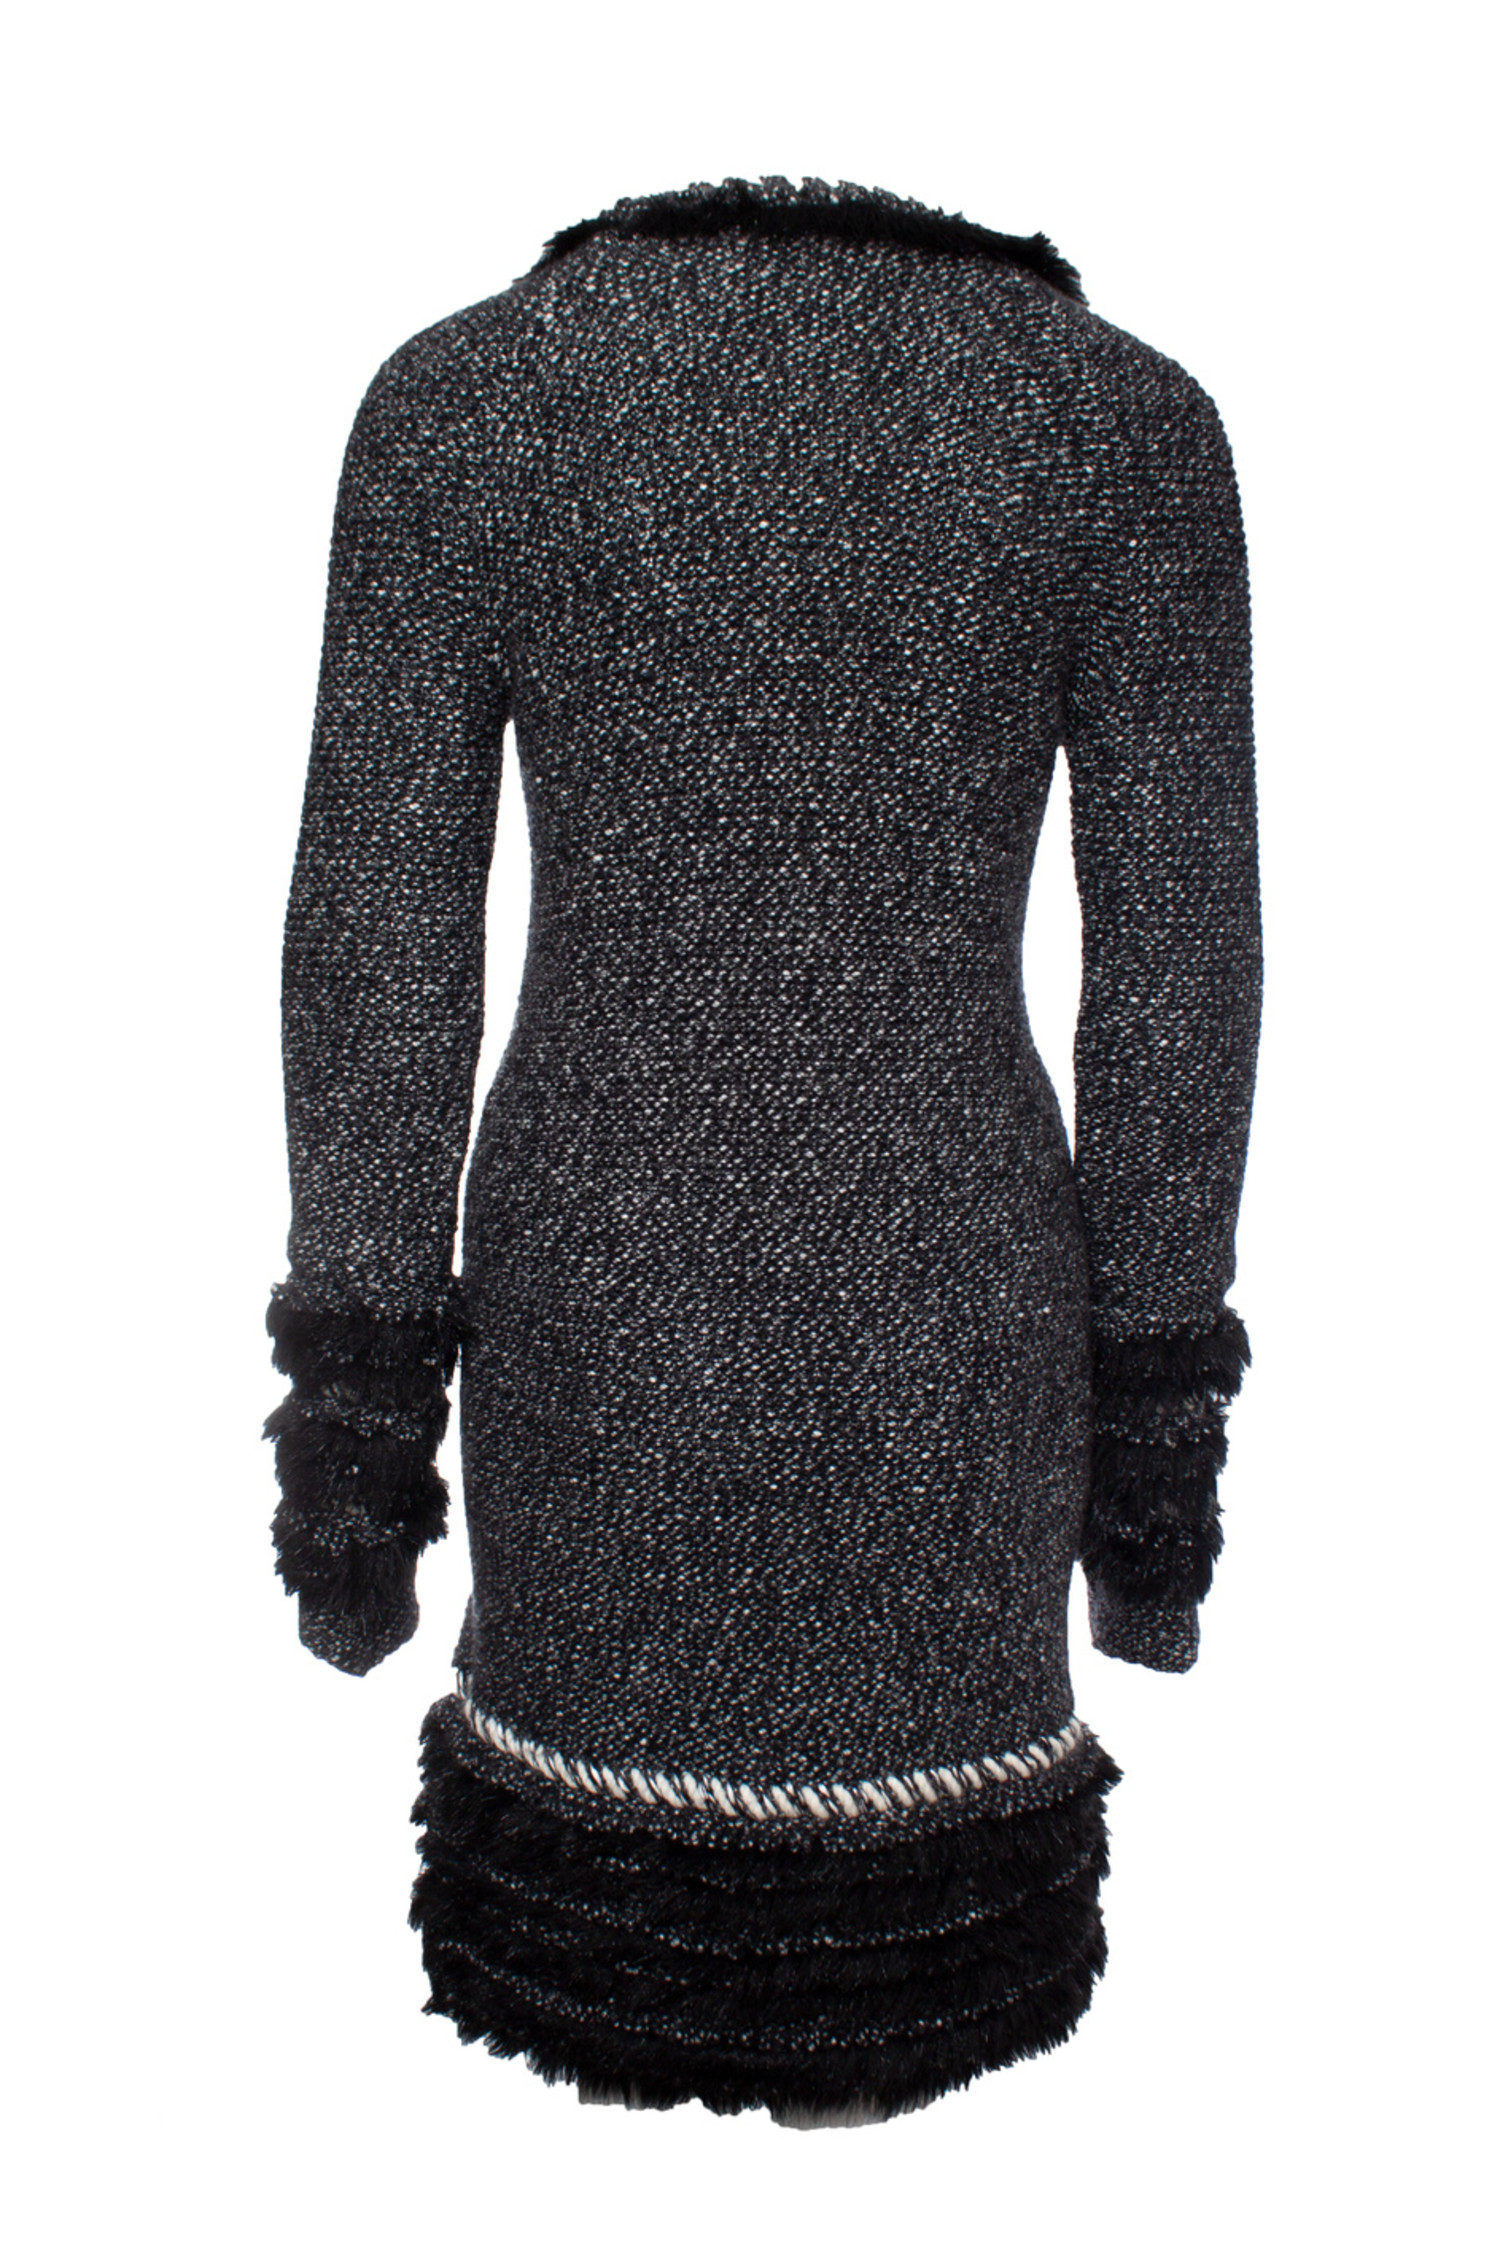 Louis Vuitton Cashmere Sweater with Mink Pom-Pom Sweater Clip at